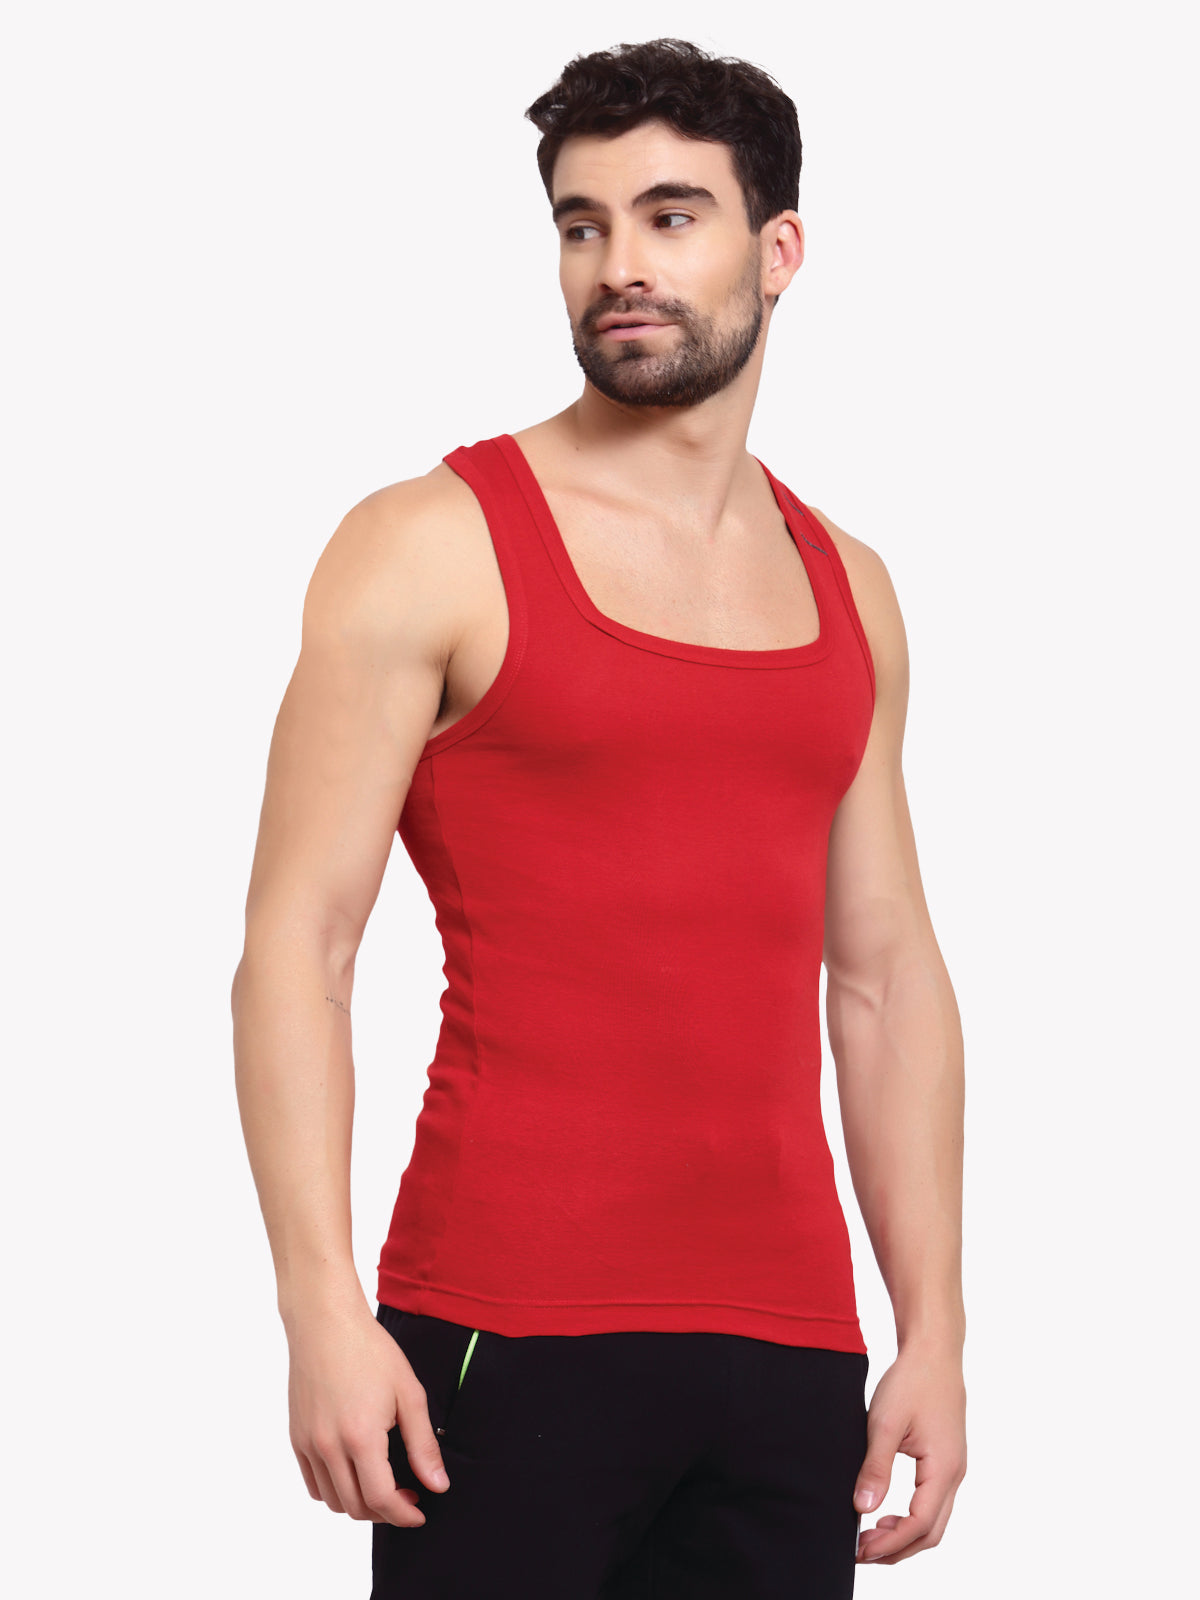 Zoiro Men&#39;s Cotton Sports Gym Vest (Pack 2) - Sky Diver + Chinese Red